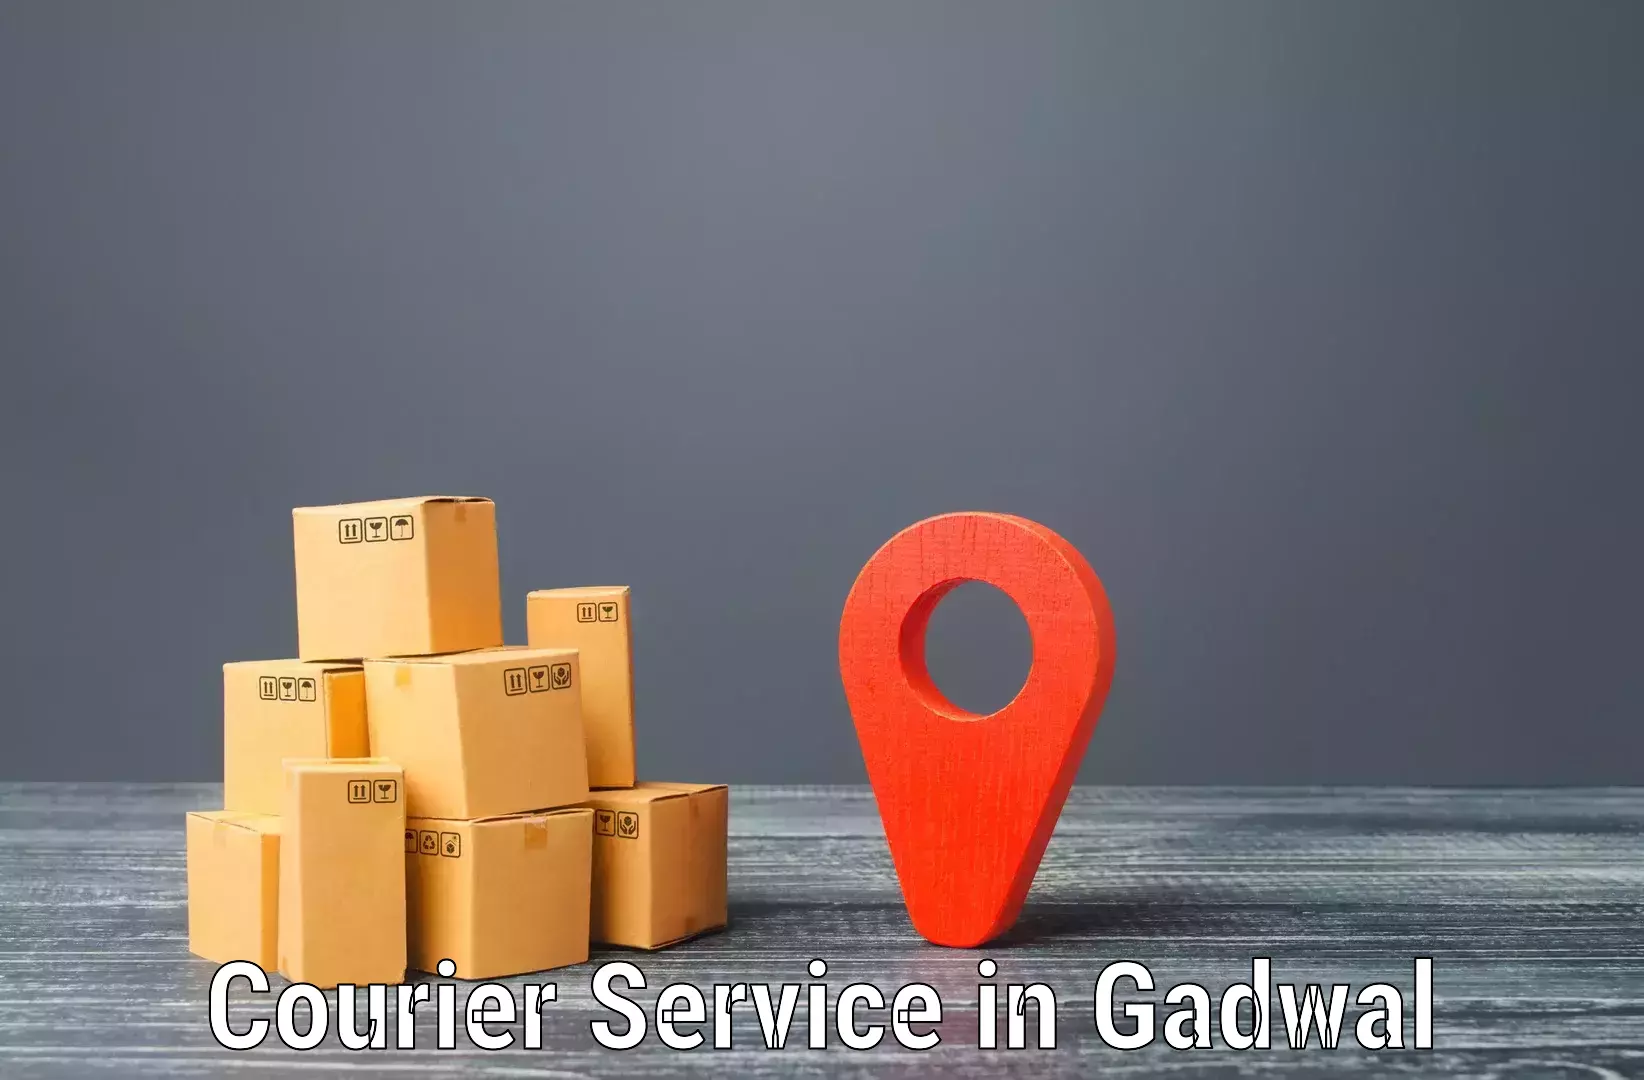 Logistics and distribution in Gadwal